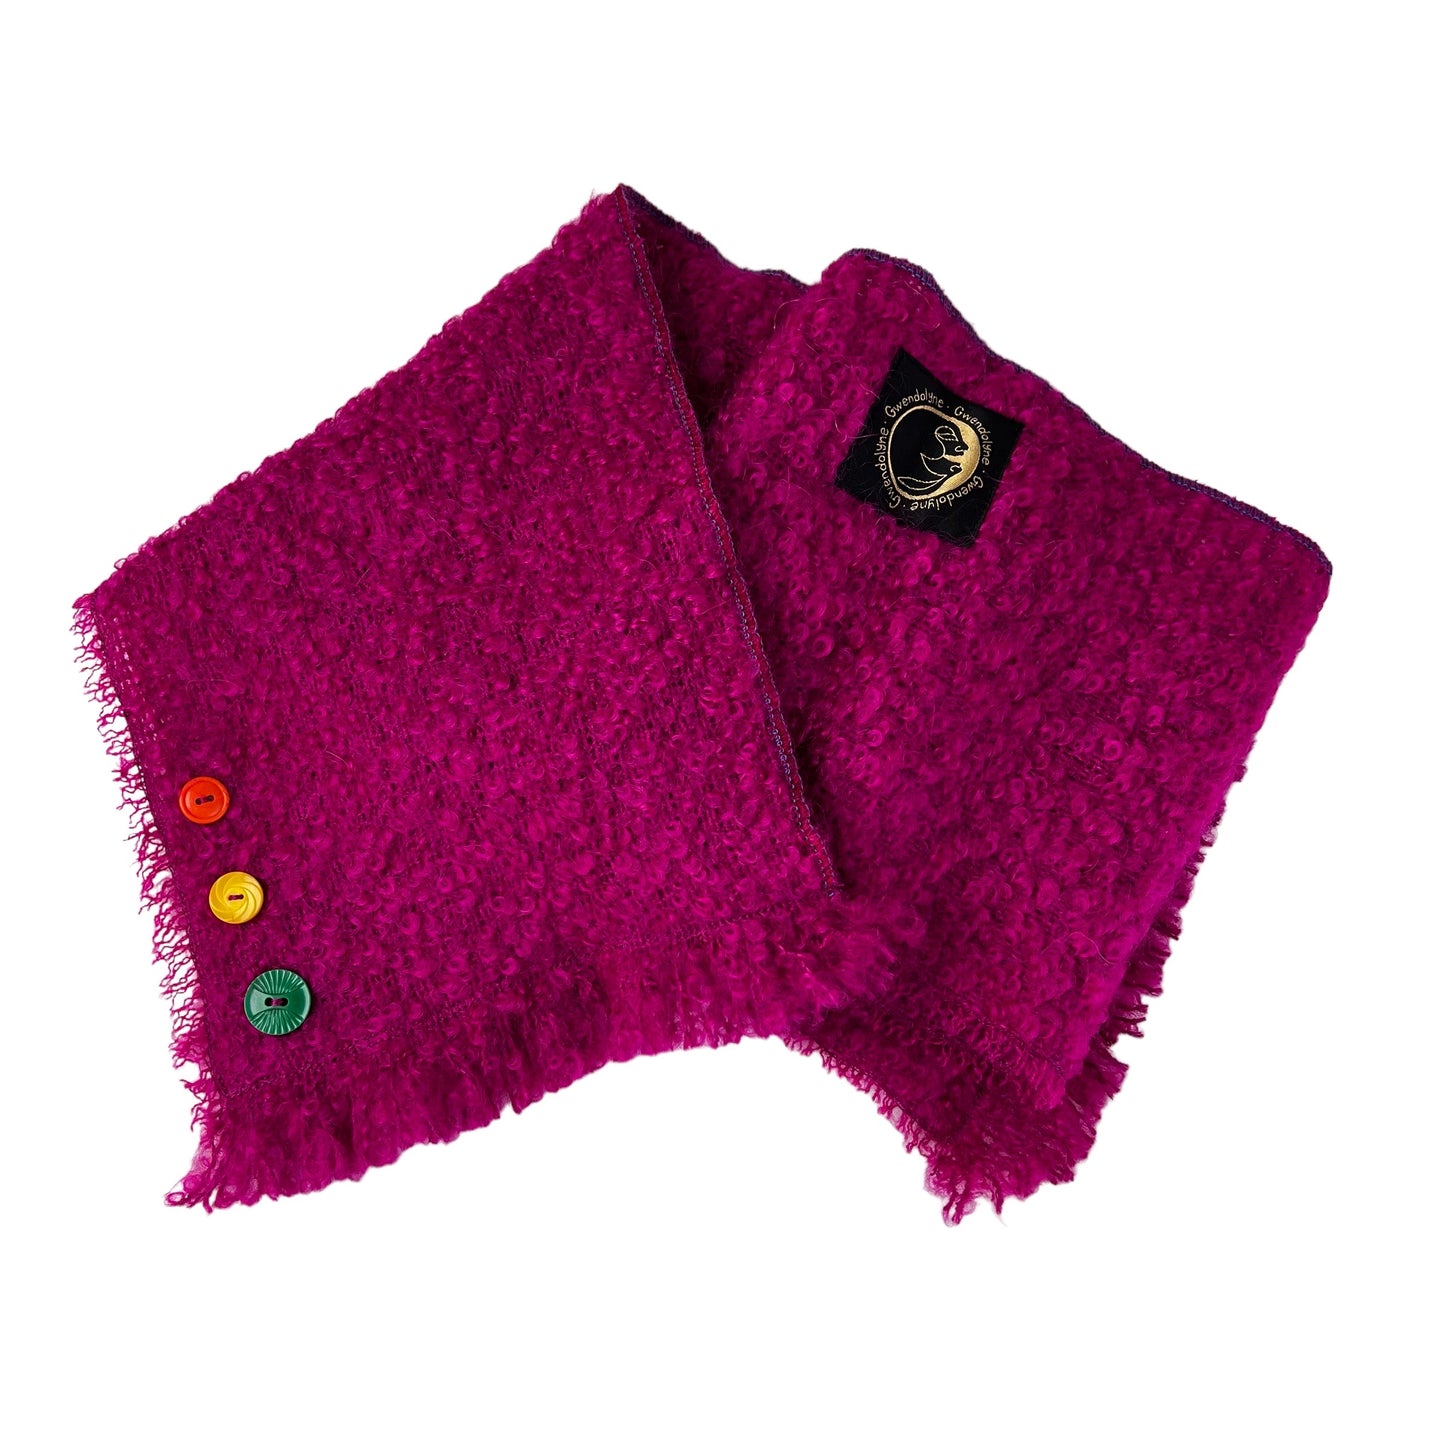 Hot Pink Fushia Boucle Weave Fringe with Buttons Scarf